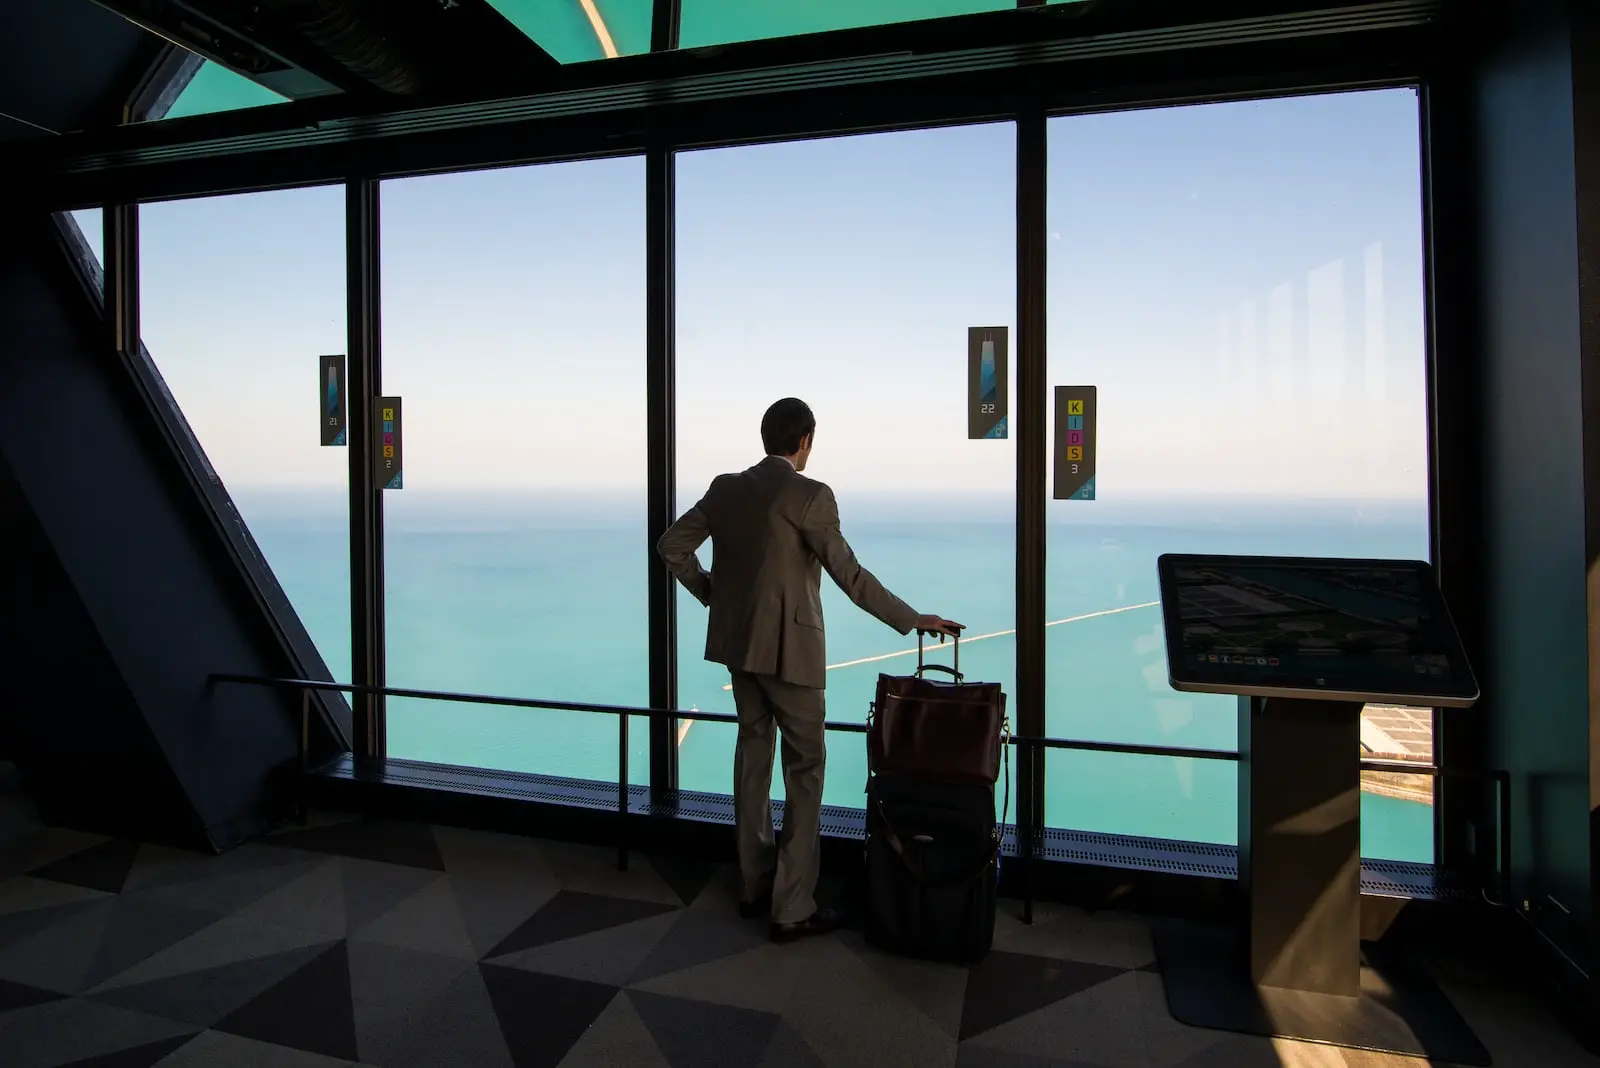 What Are the Recommended Security Measures for Business Travelers?